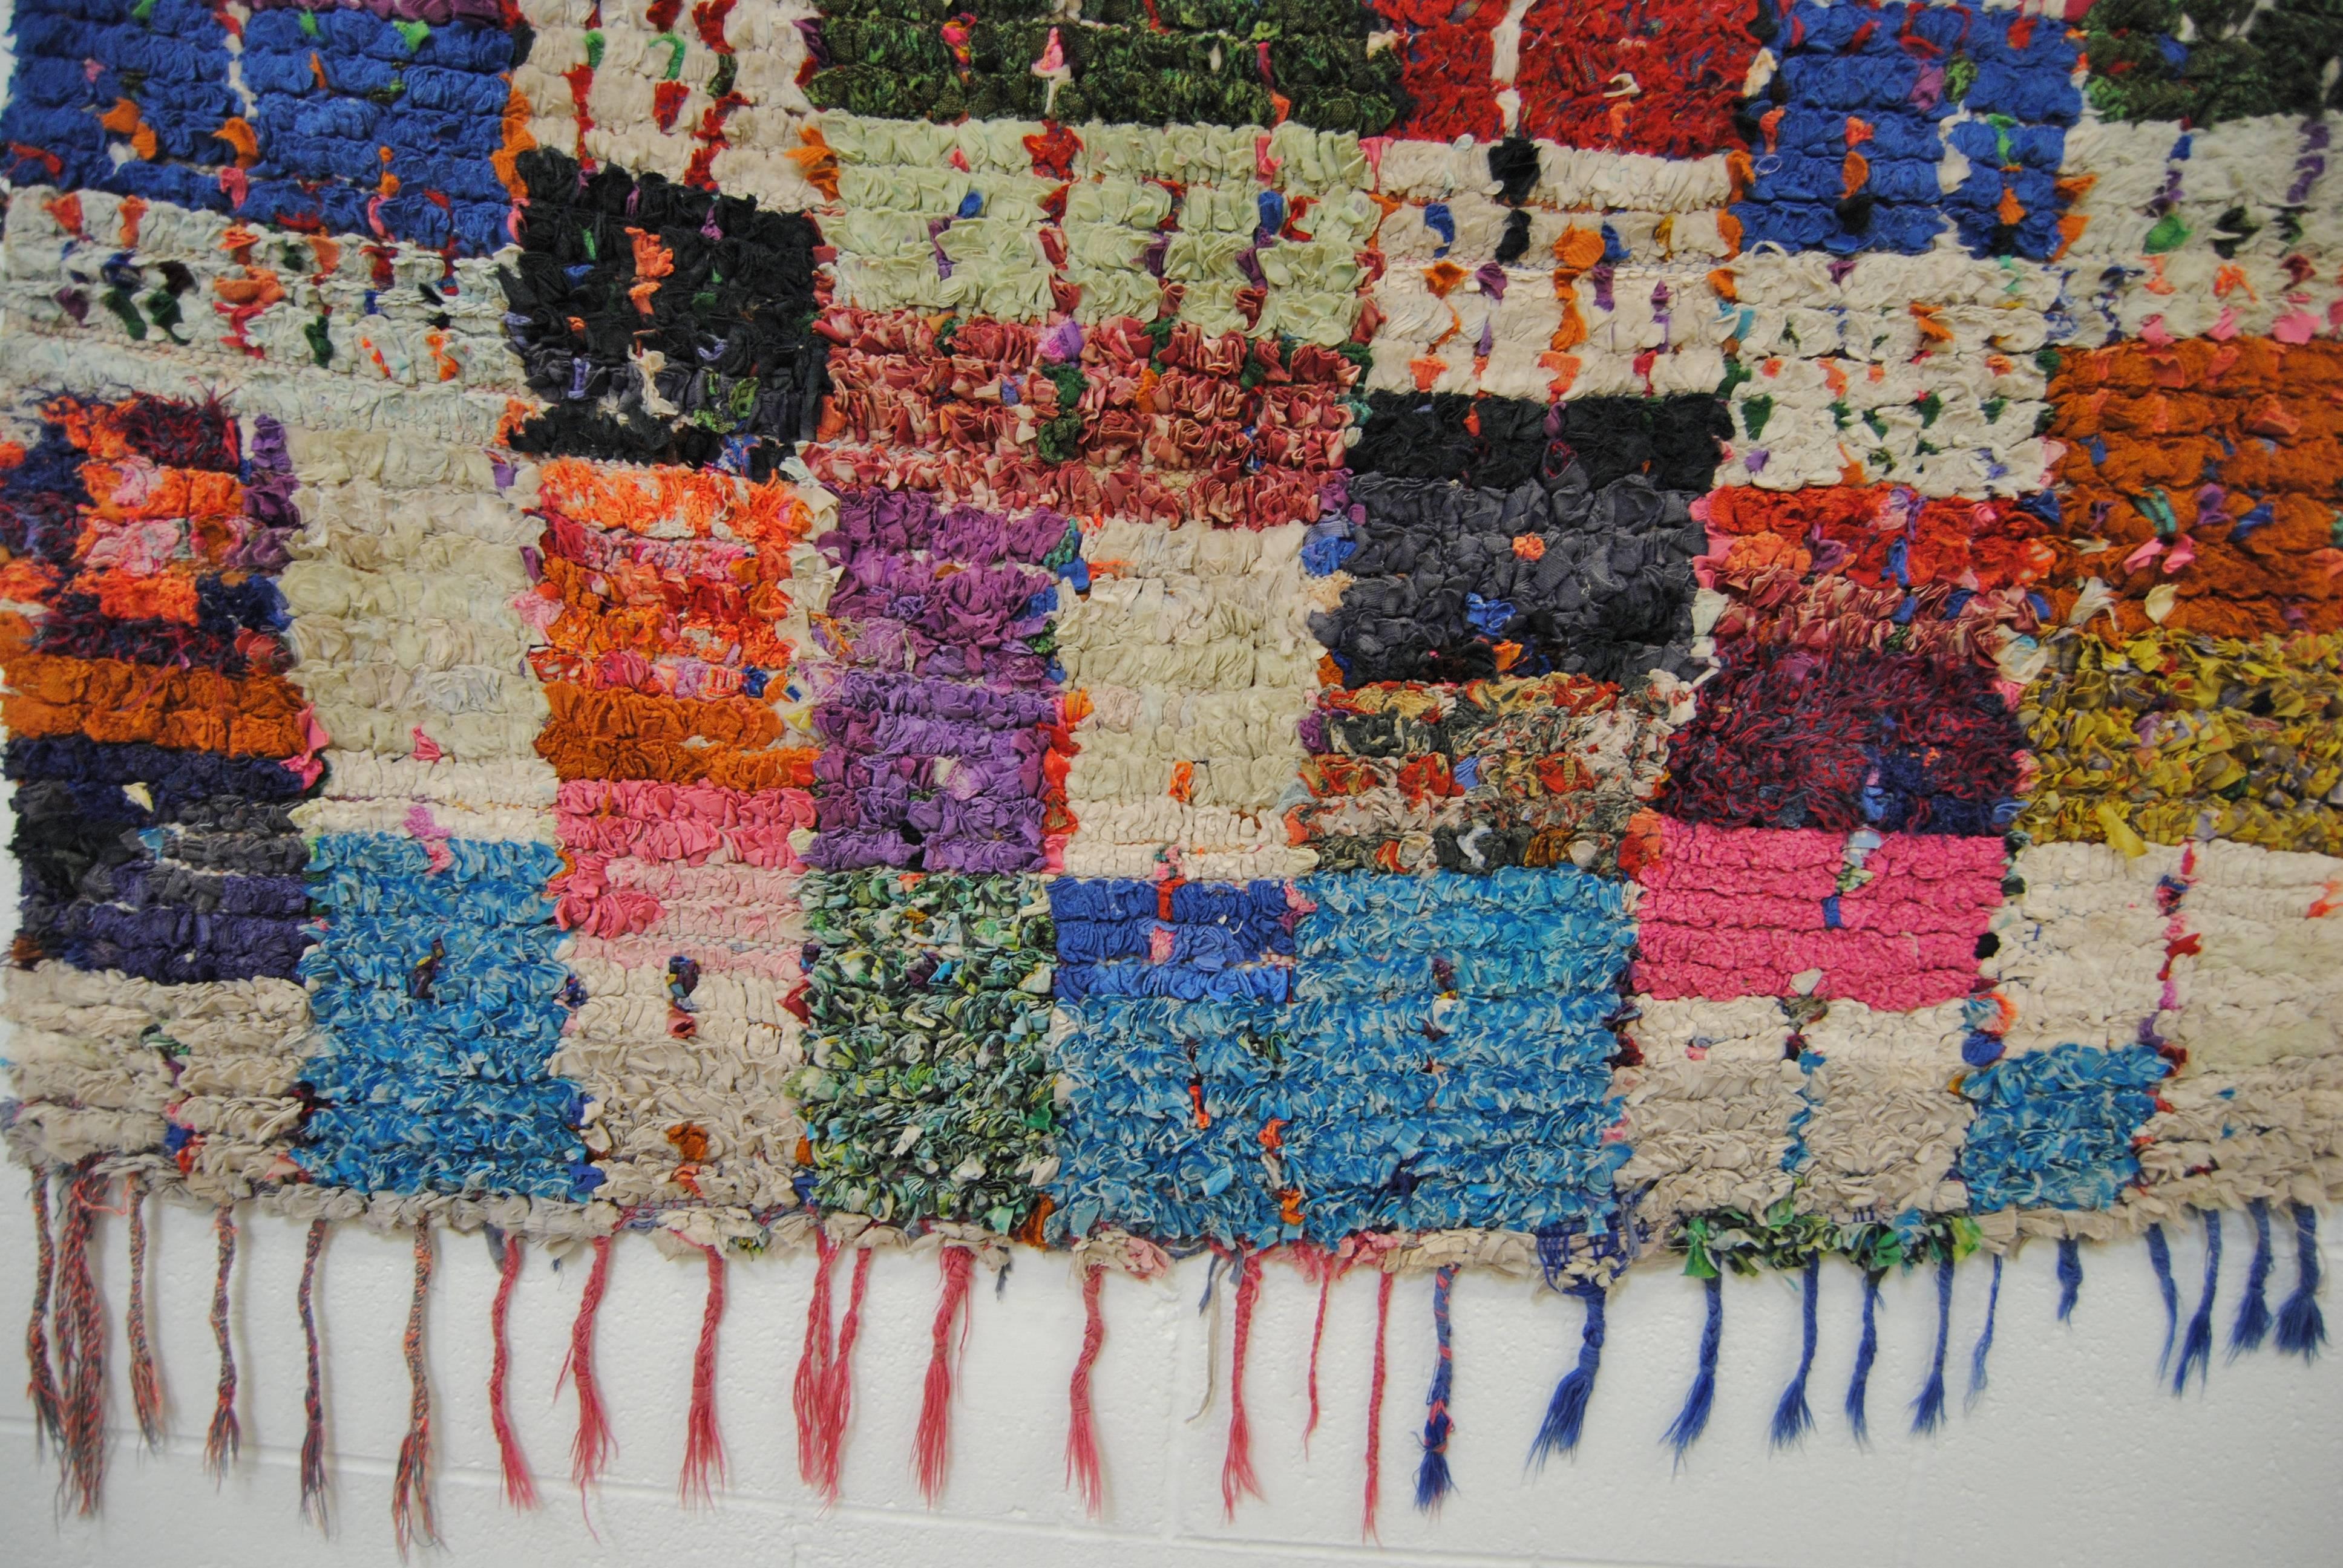 Moroccan hand-loomed Boucherouite rug made in the Atlas Mountains. This heavy rug is made from cotton and other recycled textiles by the Berber tribes. Vibrant color is common in the boucherouite rug. Recently professionally cleaned, for floor or